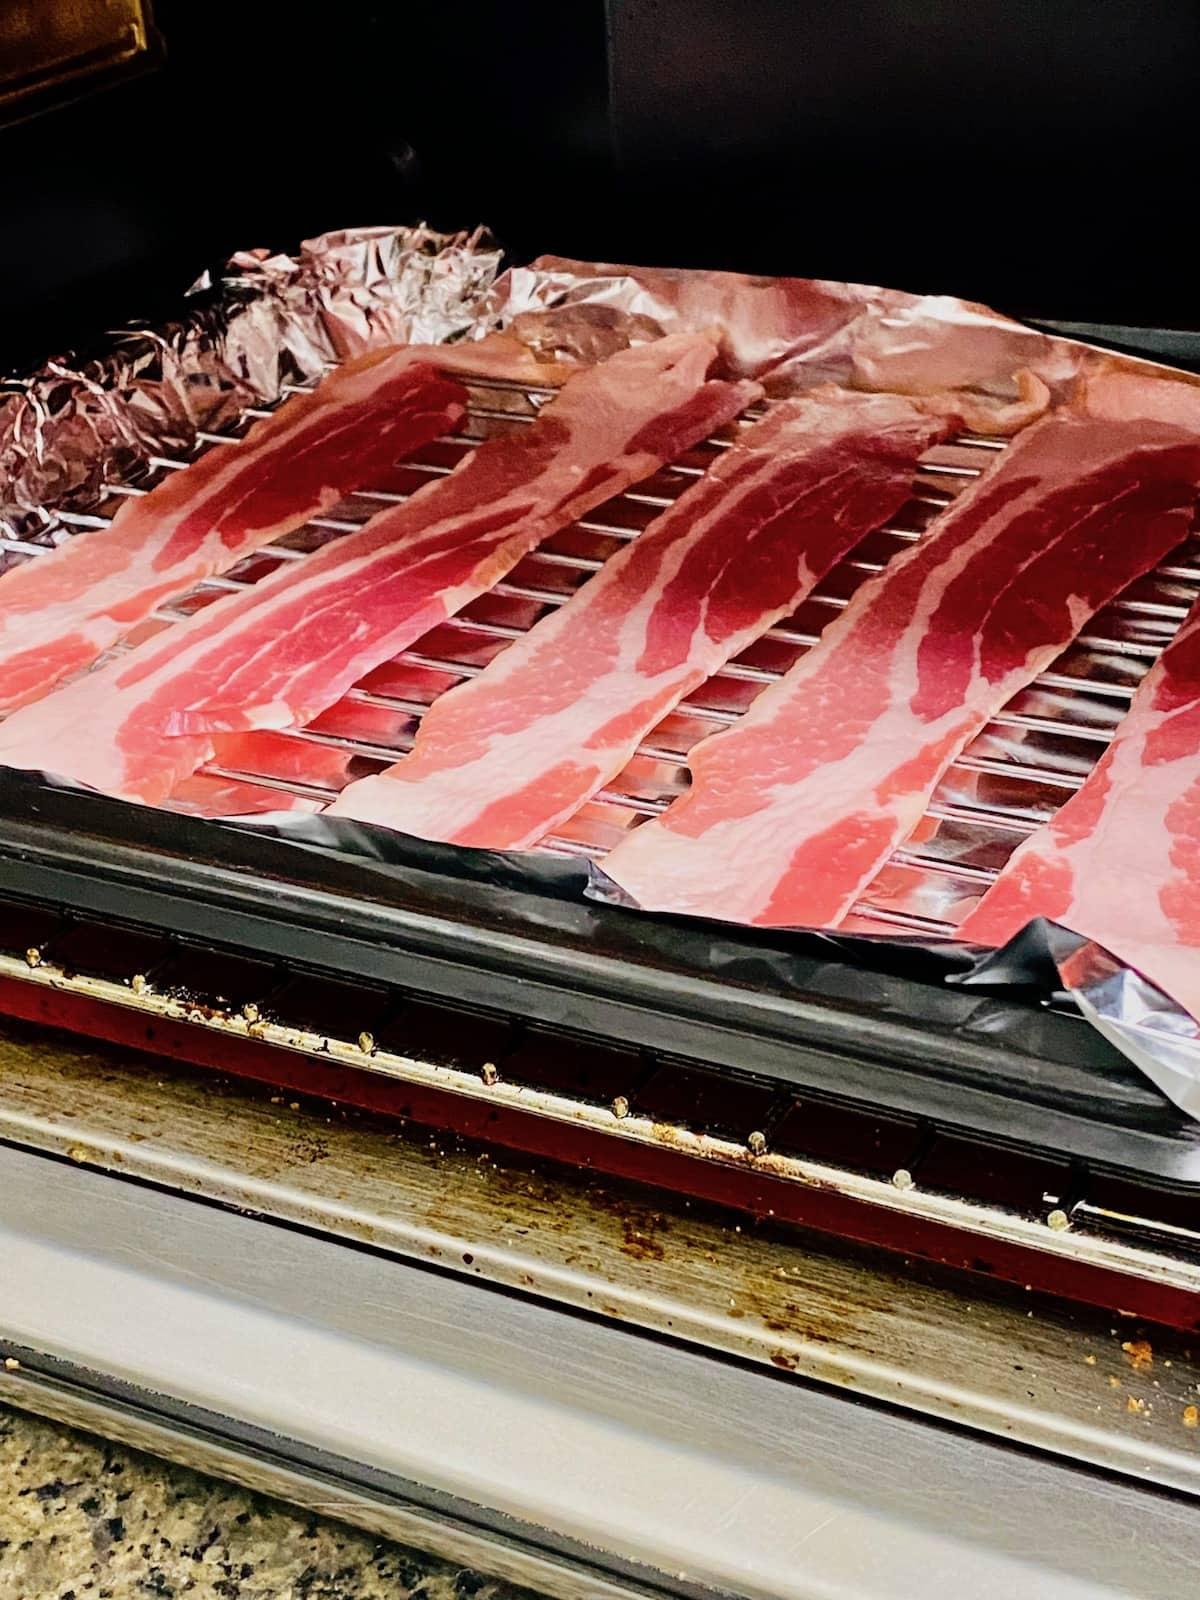 Packet of bacon in front of a toaster oven set to 425 degrees.